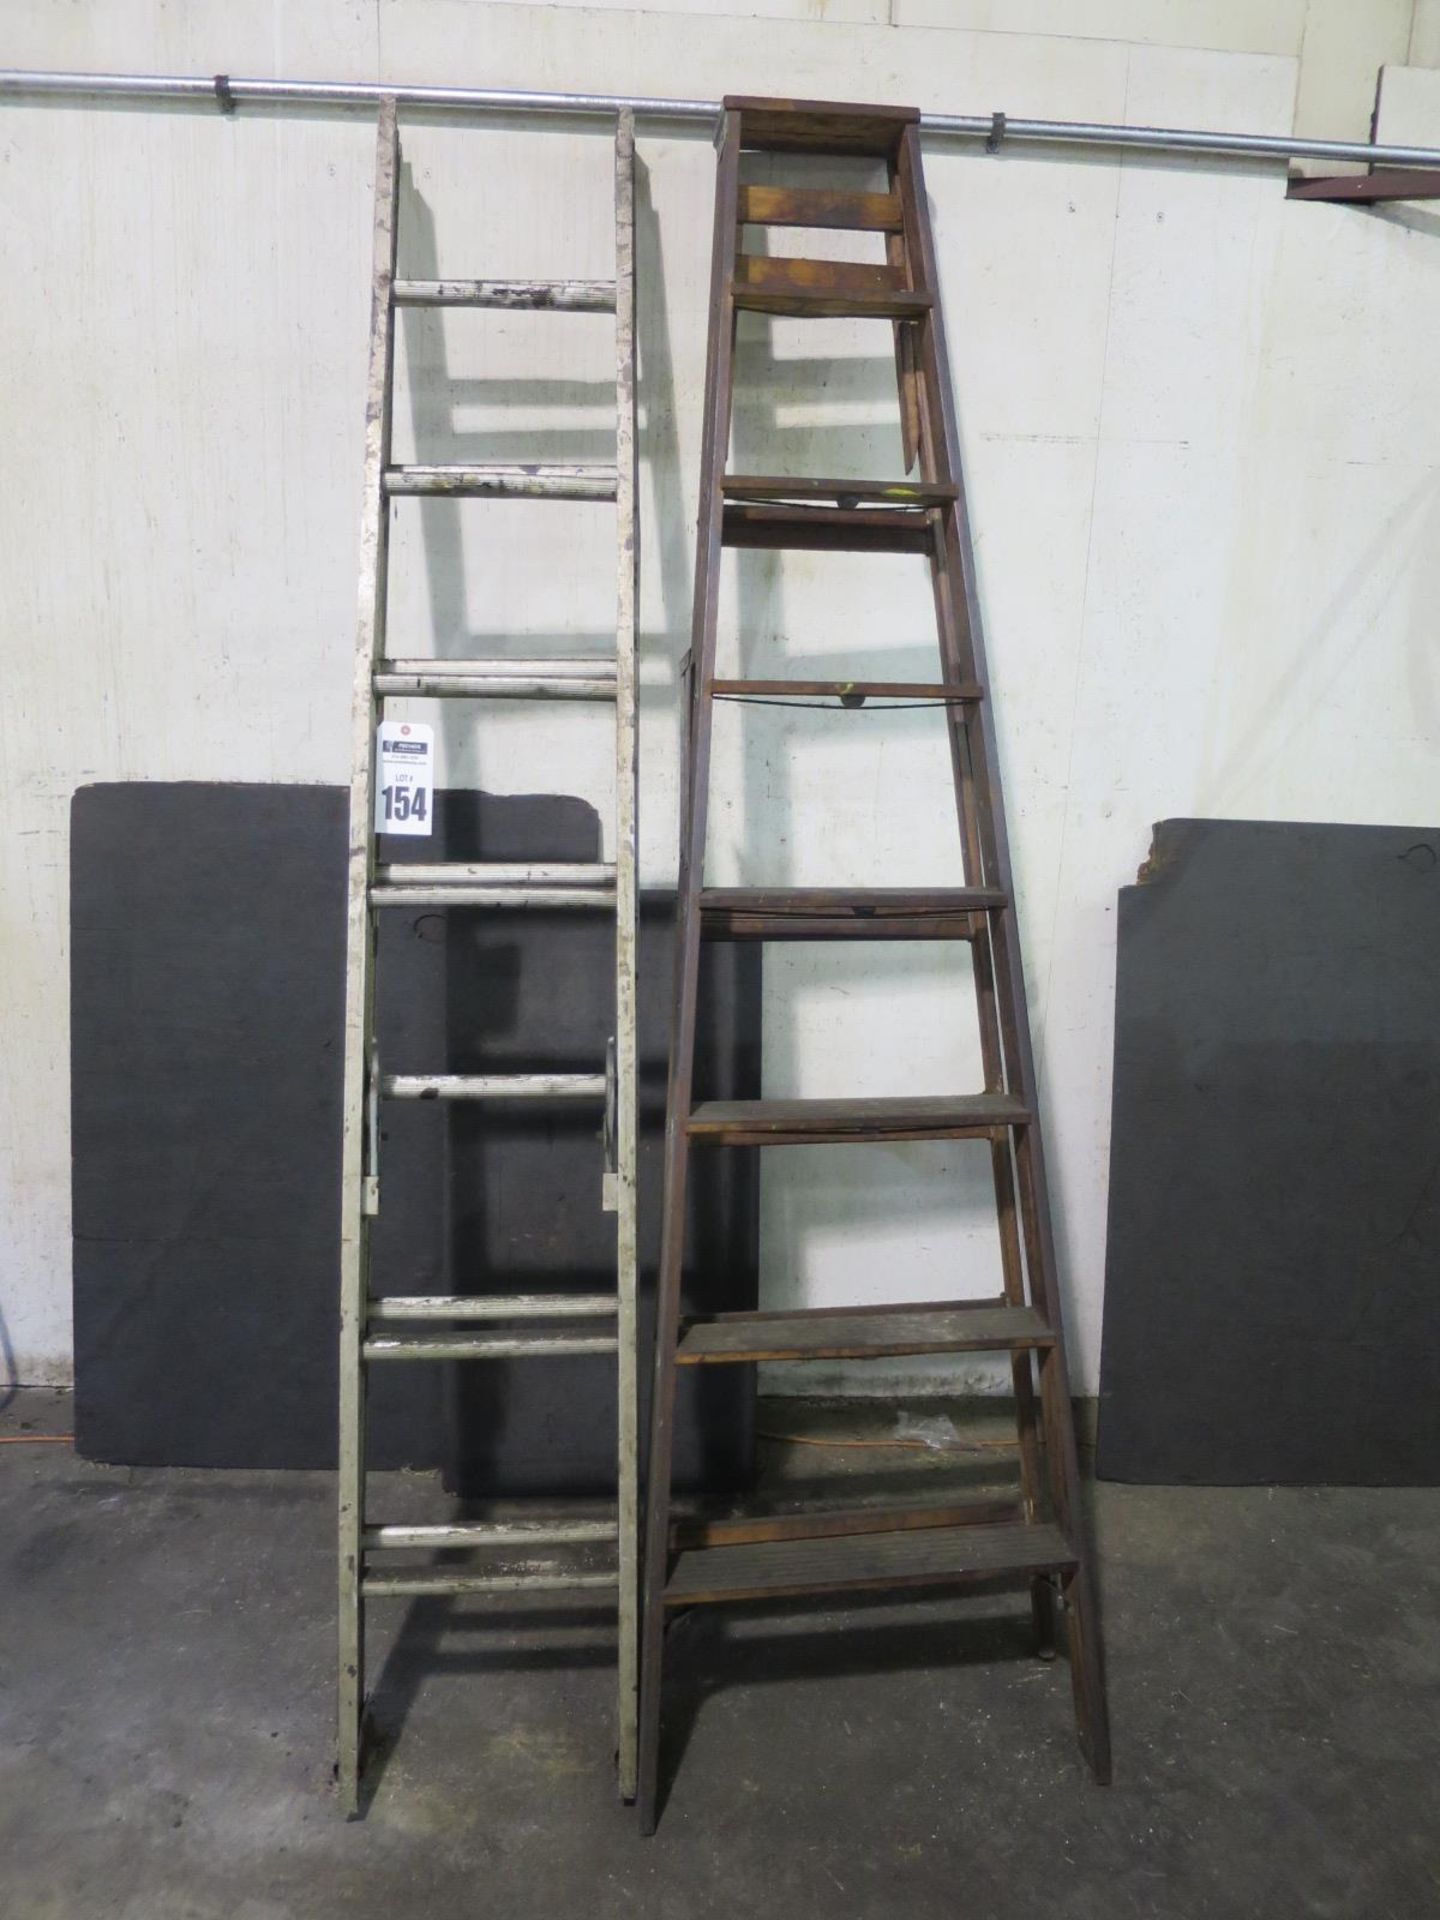 (2) ladders (late delivery)